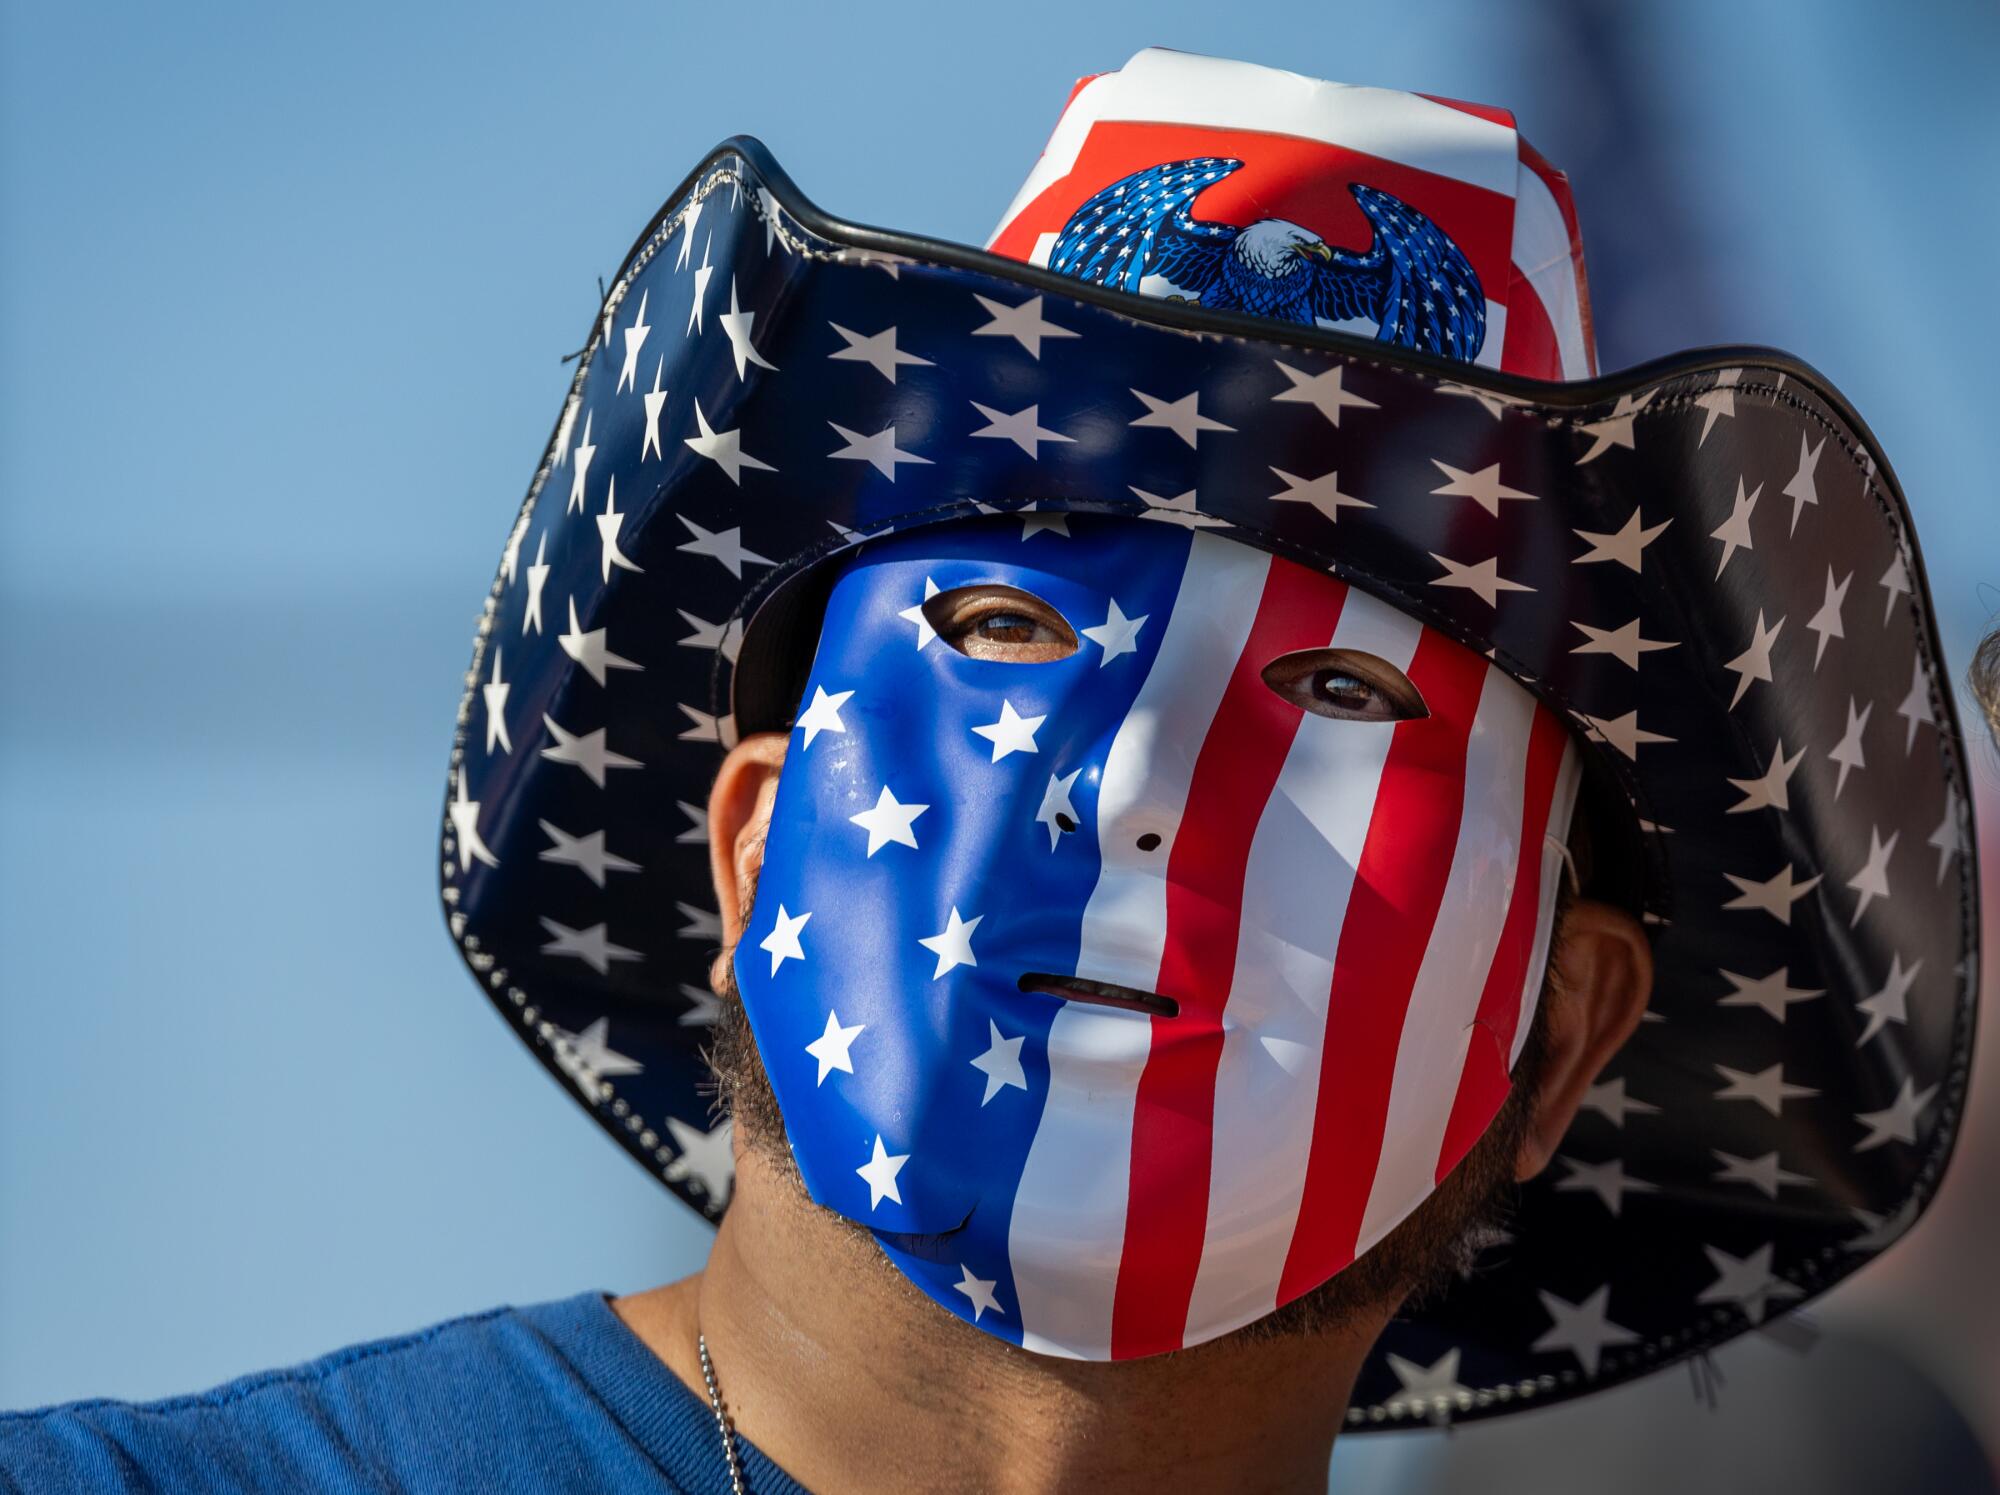 A man in an American flag hat and face paint